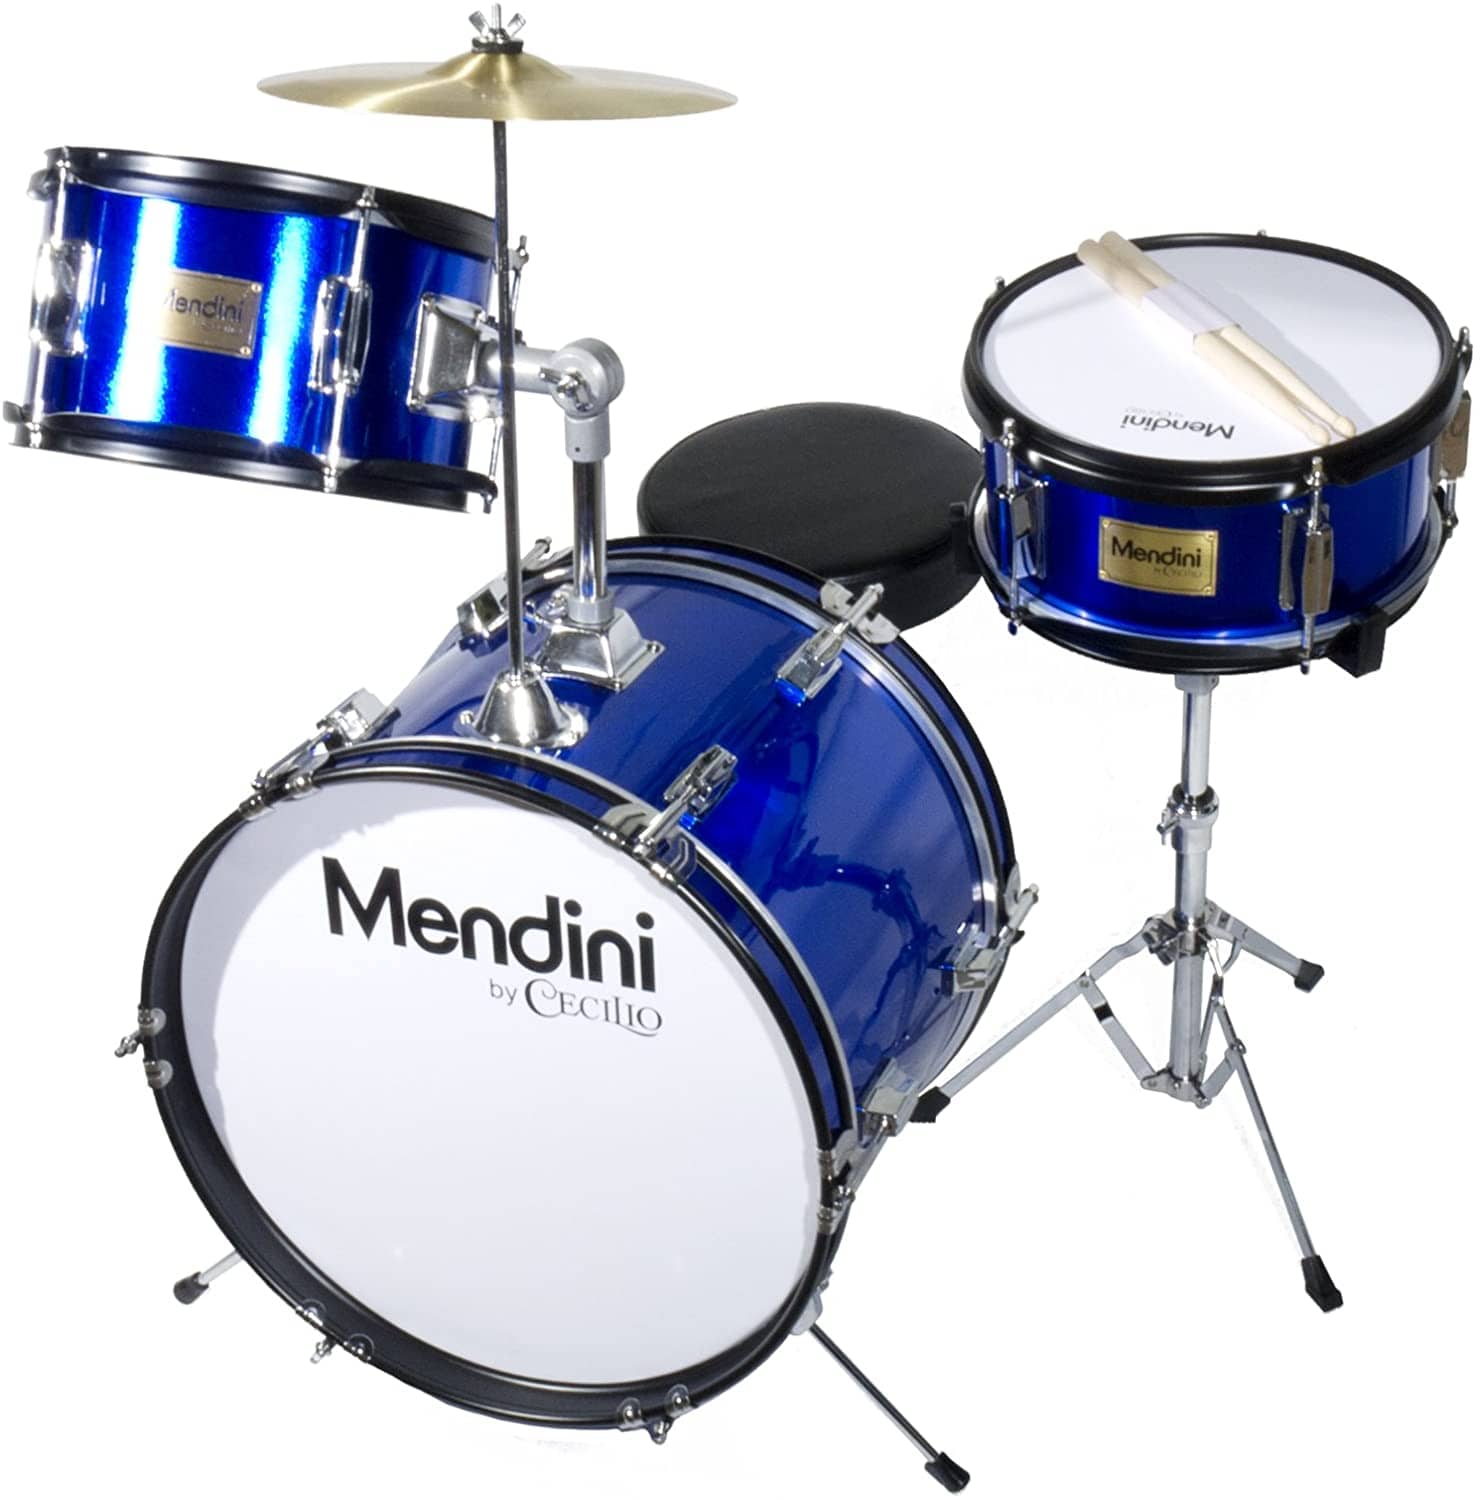 Mendini by Cecilio 16 inch 3-Piece Kids/Junior Drum Set with Adjustable Throne, Cymbal, Pedal & Drumsticks, Metallic Green, MJDS-3-GN 24